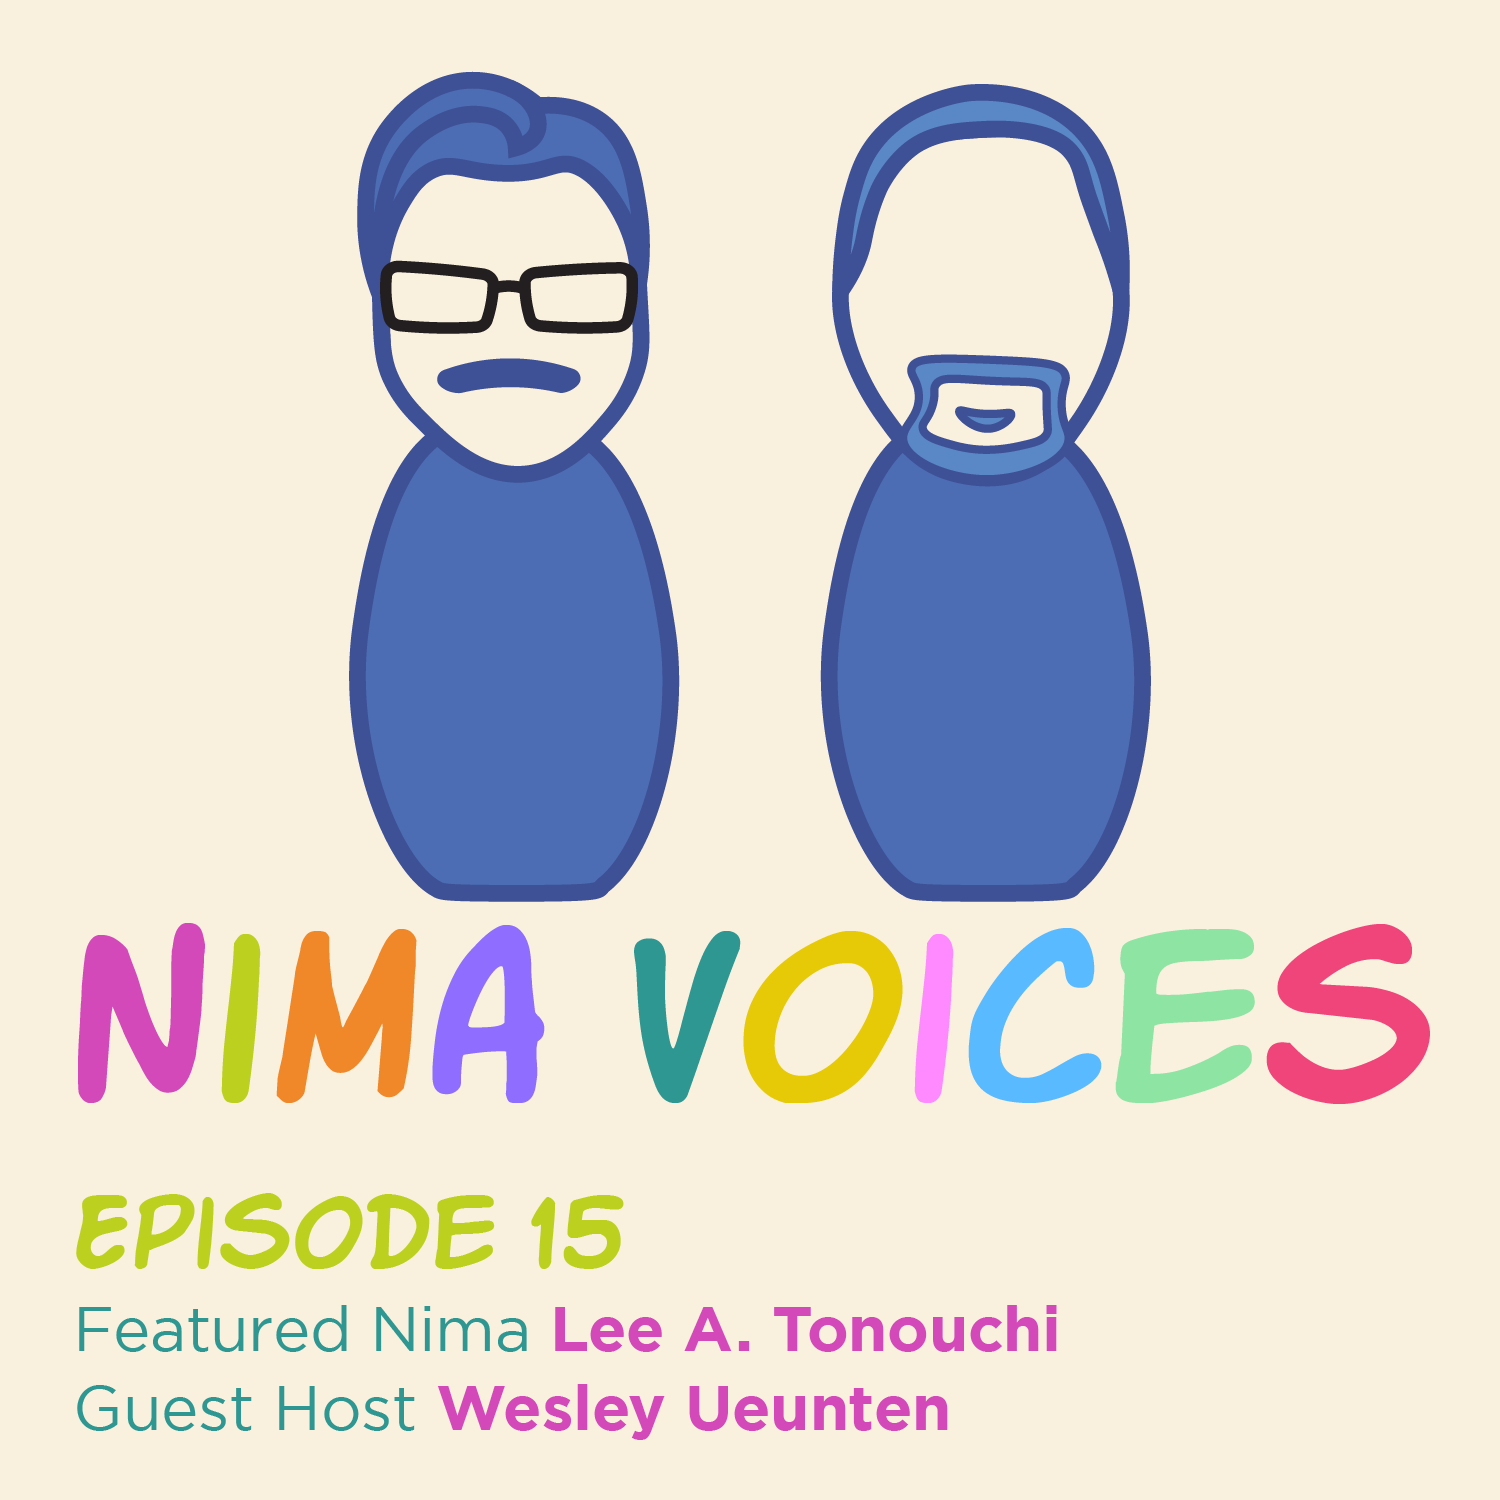 Nima Voices Episode 15 graphic with kokeshi avatars - the one on the left has glasses and mustache; the one on the right has mustache and beard